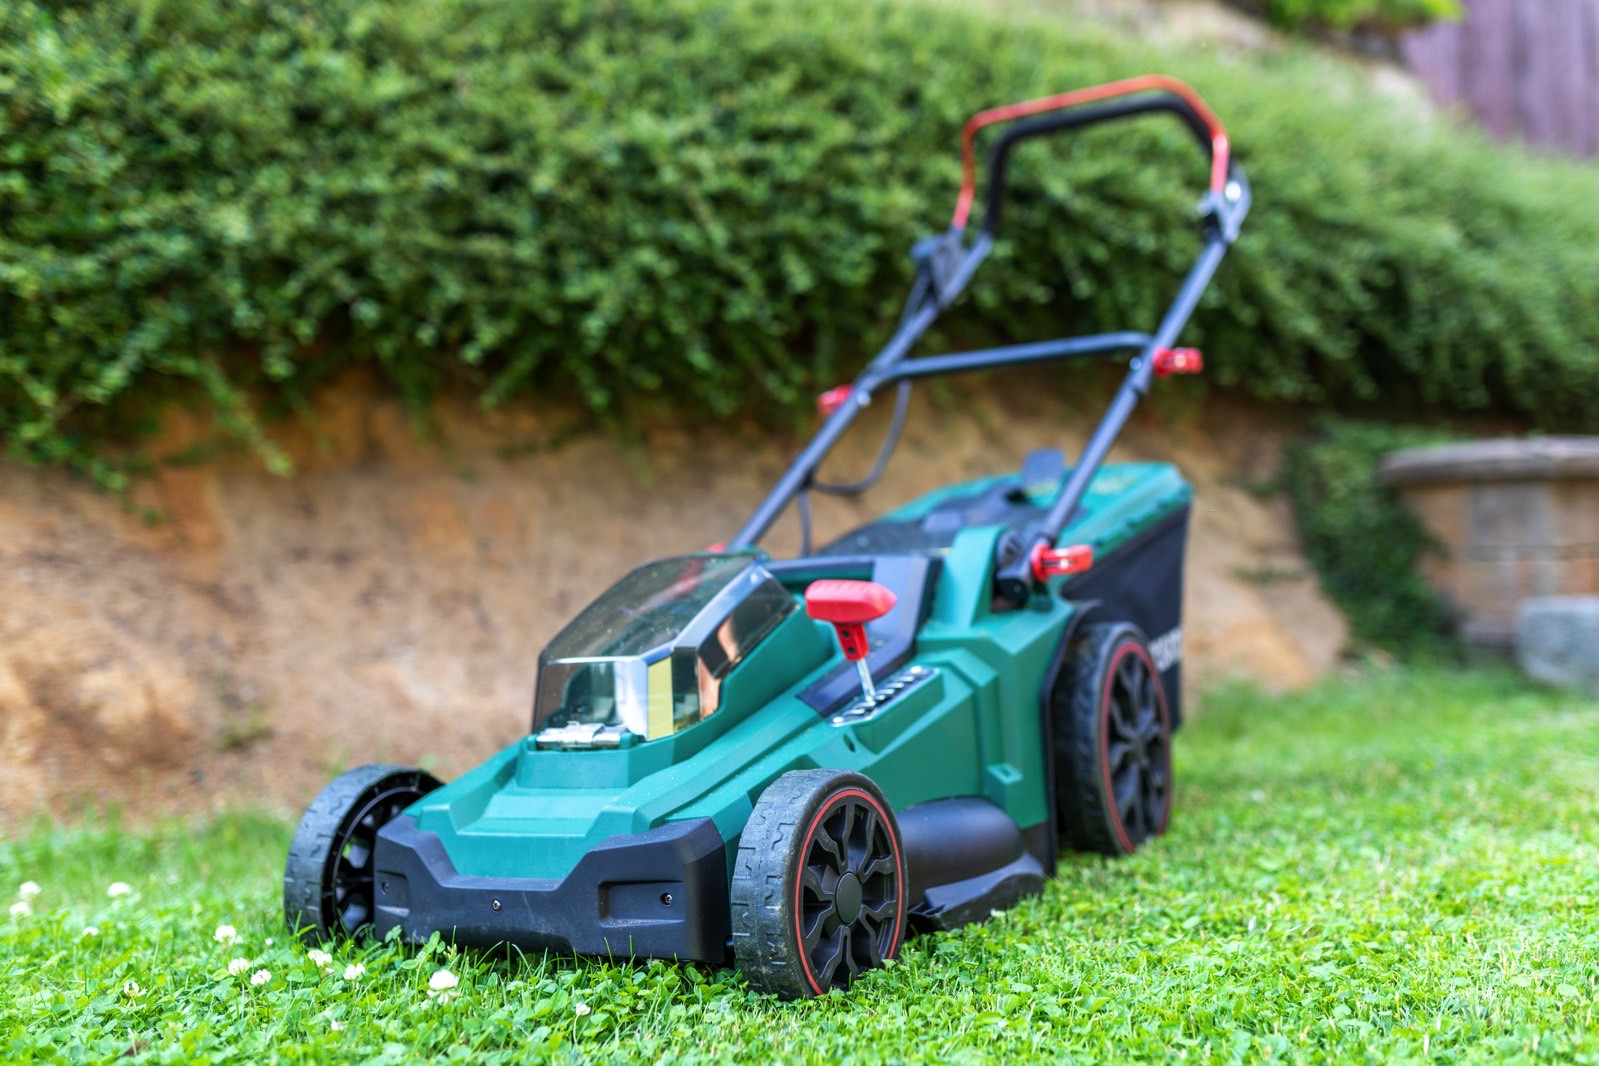 Lawn mower recall 31 people already had bolts or blades come off this